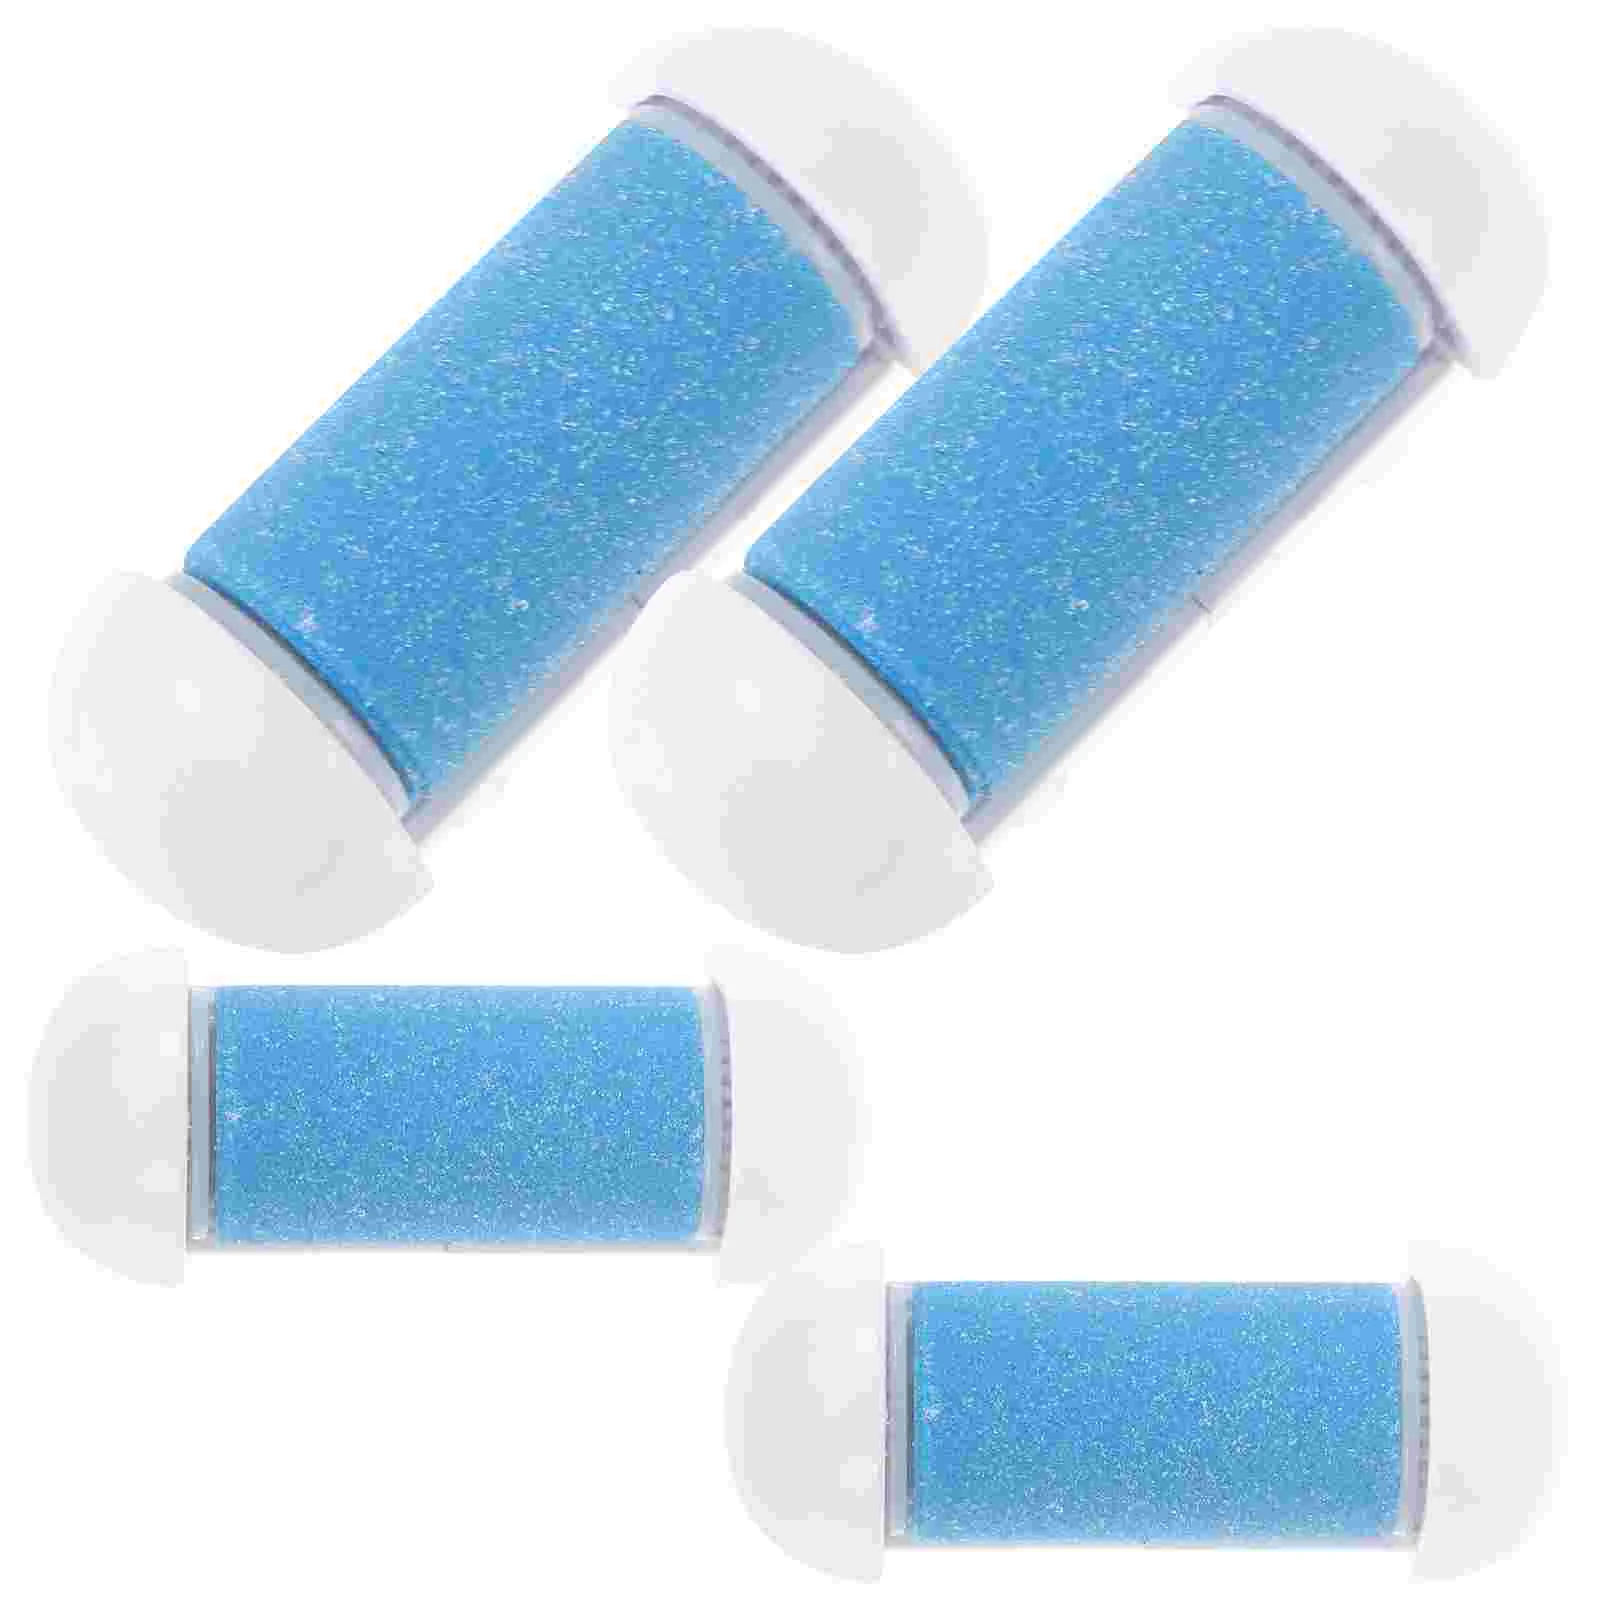 

4 Pcs Dead Skim Remover Foot Grinding Device Electrical Tools Ligth Blue Replacement Roller Heads Care Cuticare